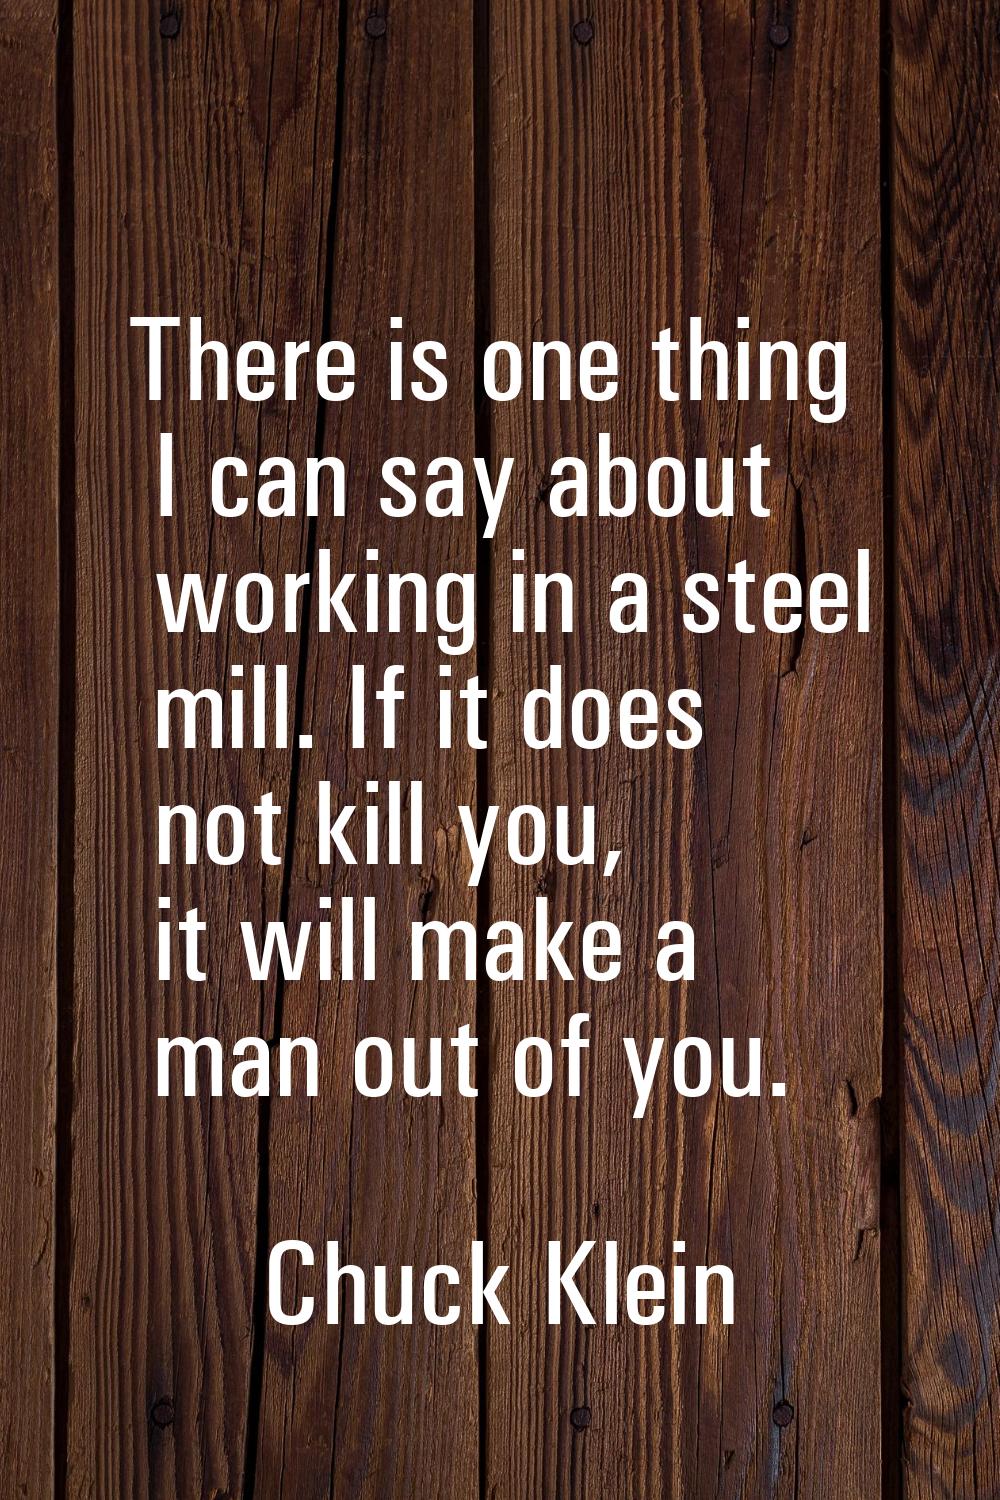 There is one thing I can say about working in a steel mill. If it does not kill you, it will make a